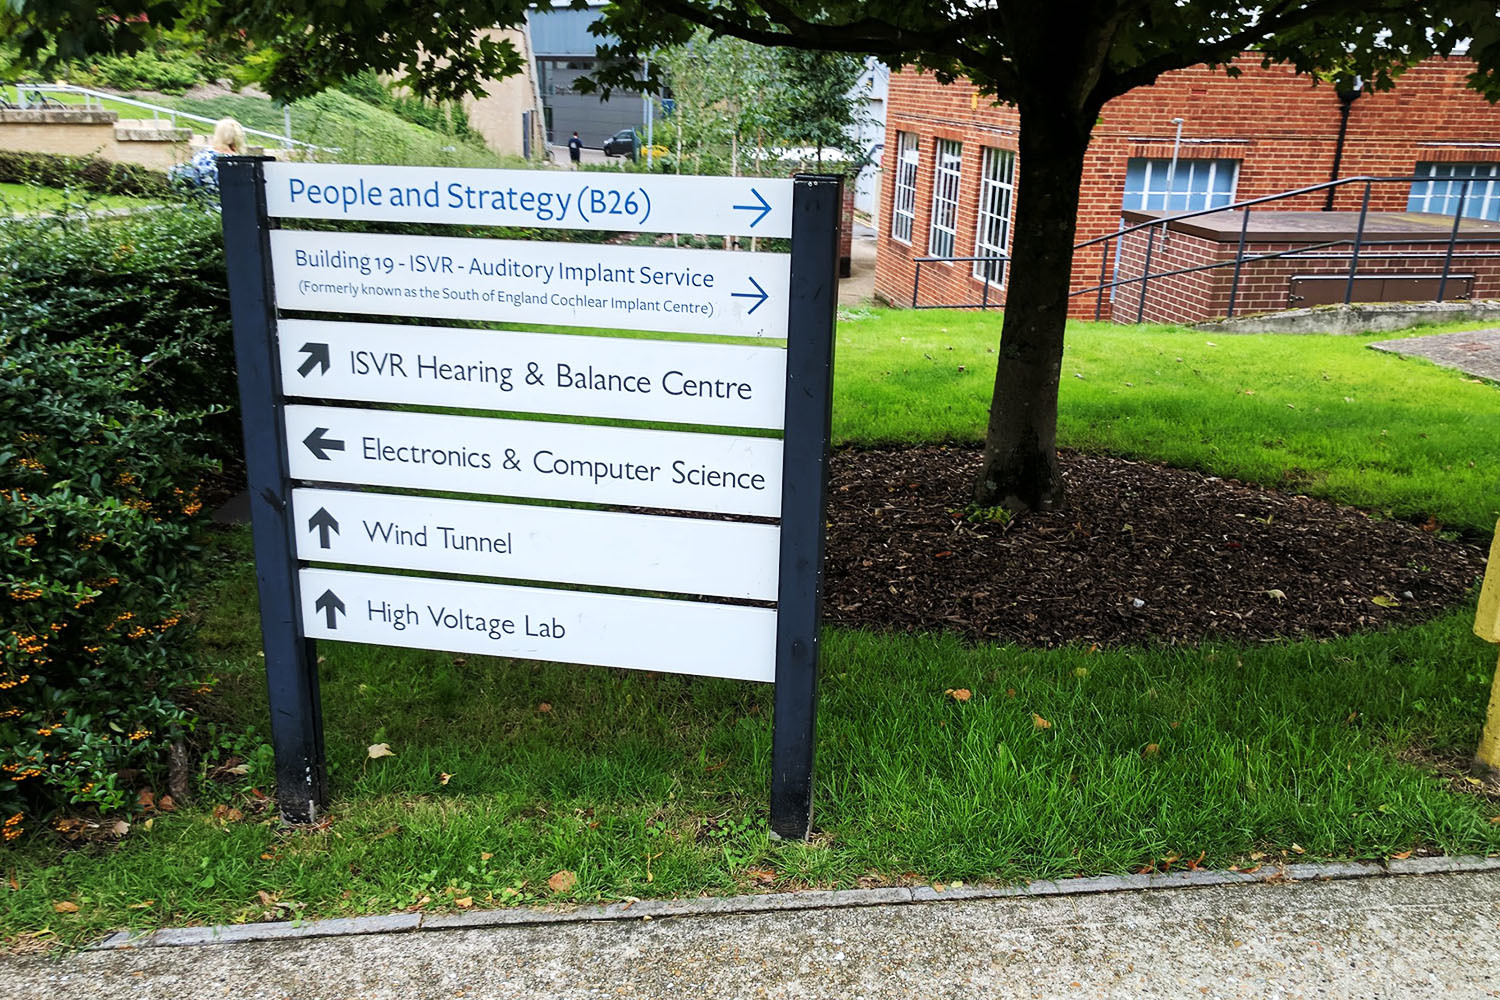 It isn't just the website signposting and navigation that is complex at University of Southampton